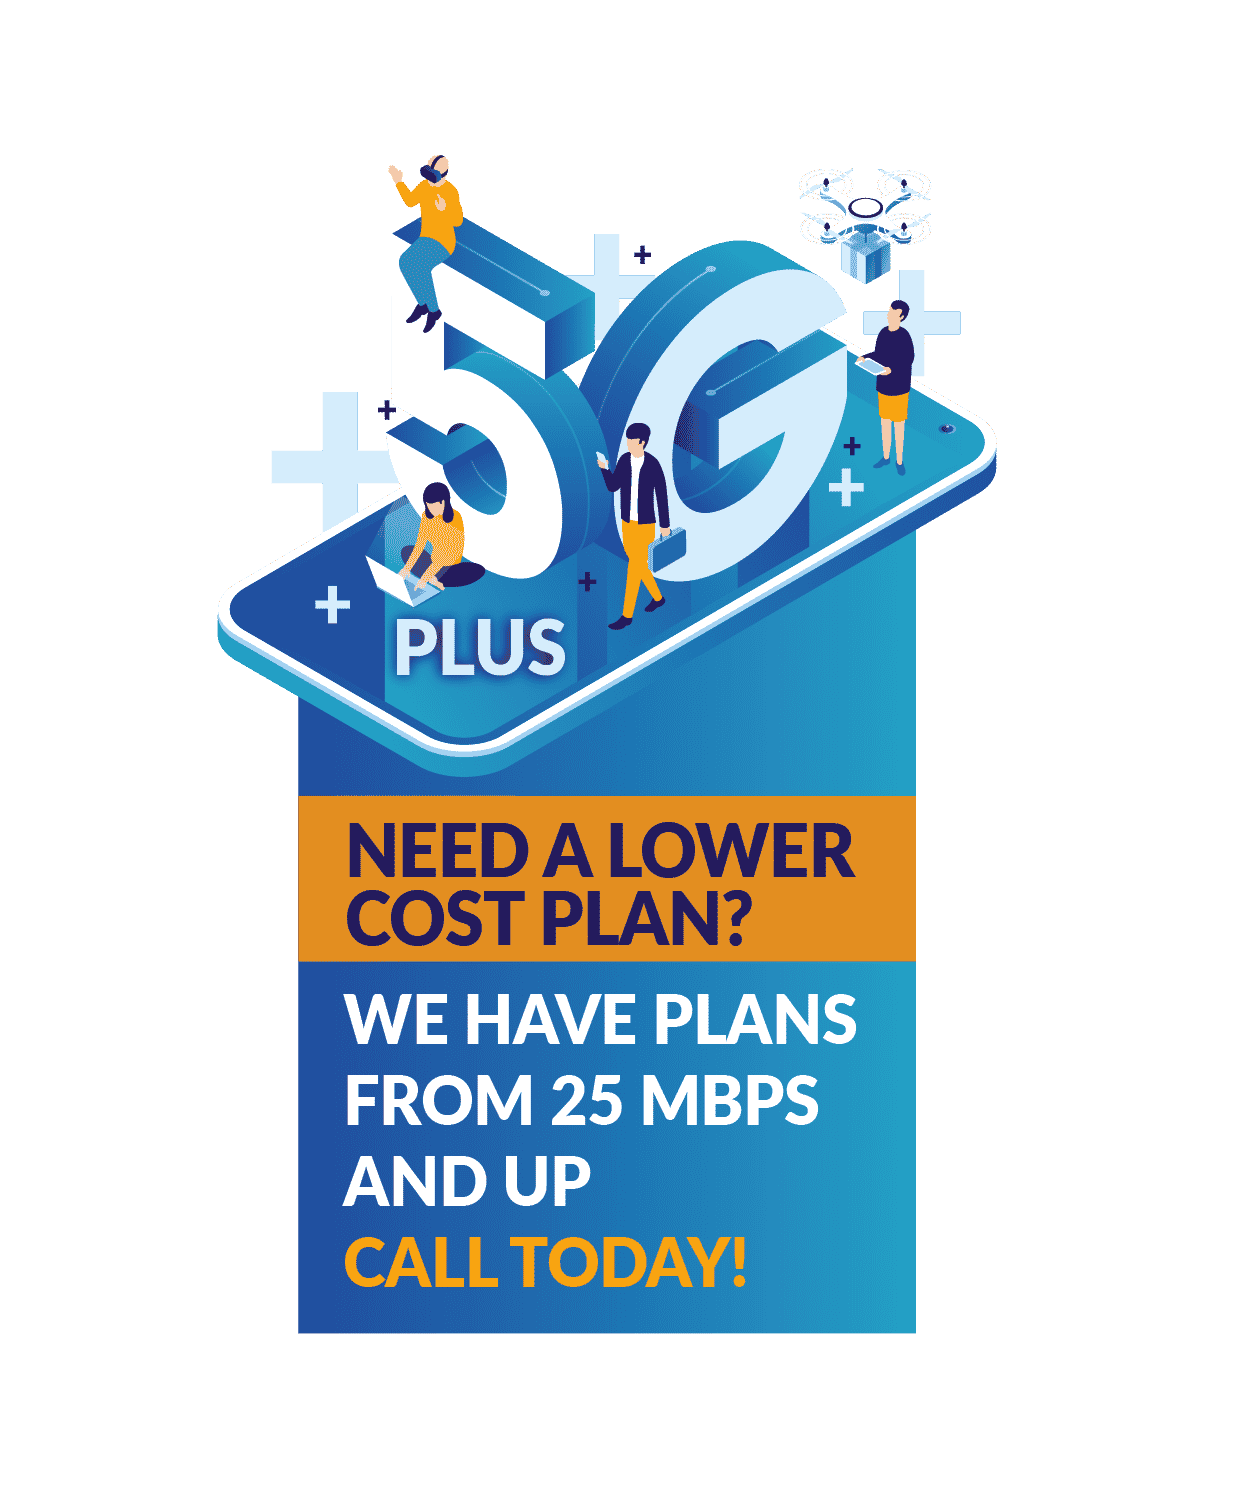 5G+ and Point to Point Reliable Rural Internet Service